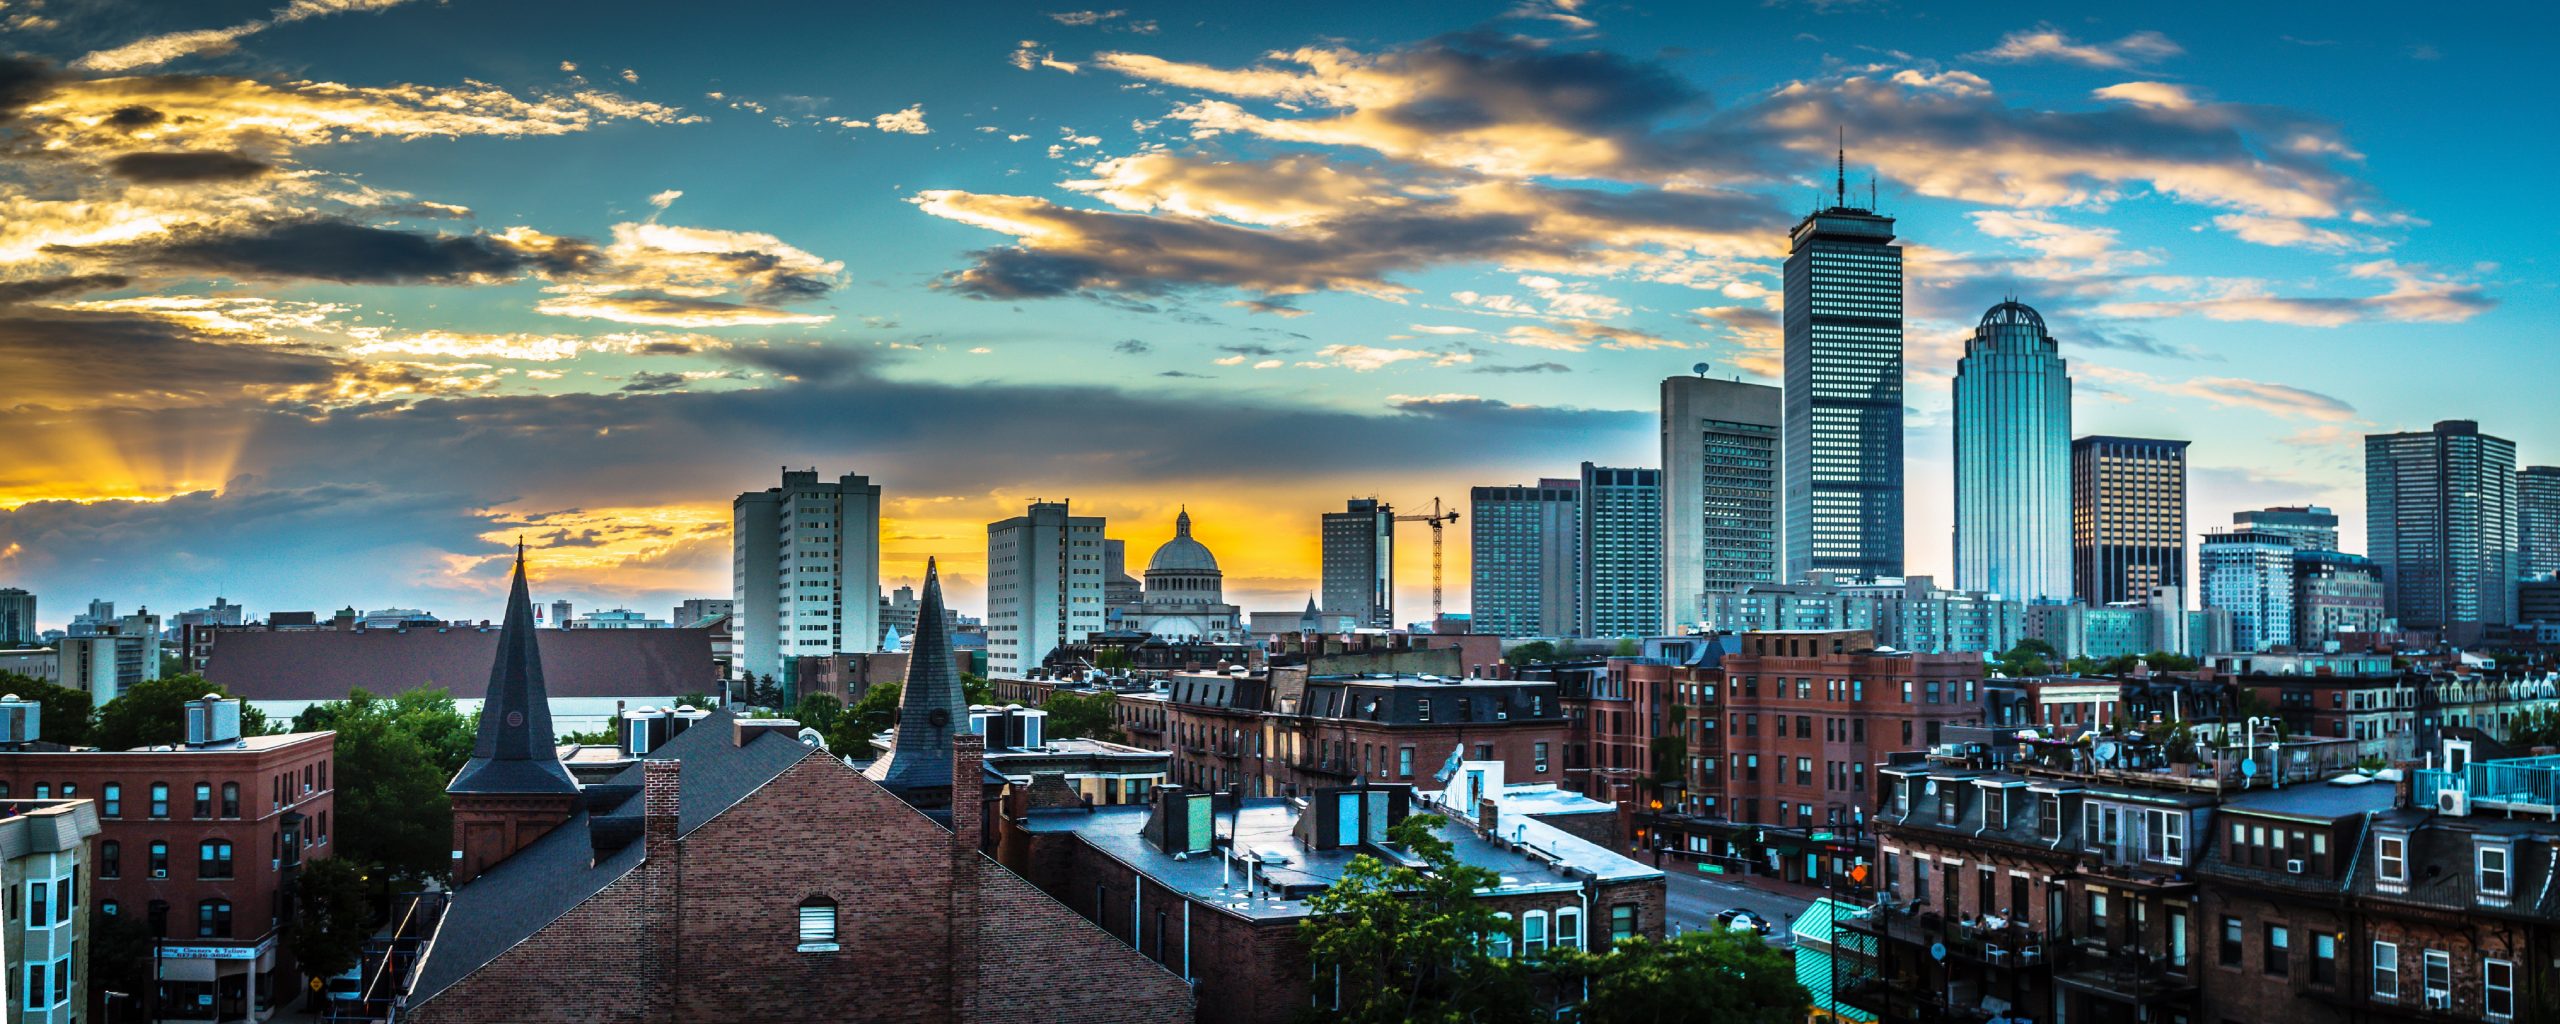 Photograph of the Boston skyline at sunset